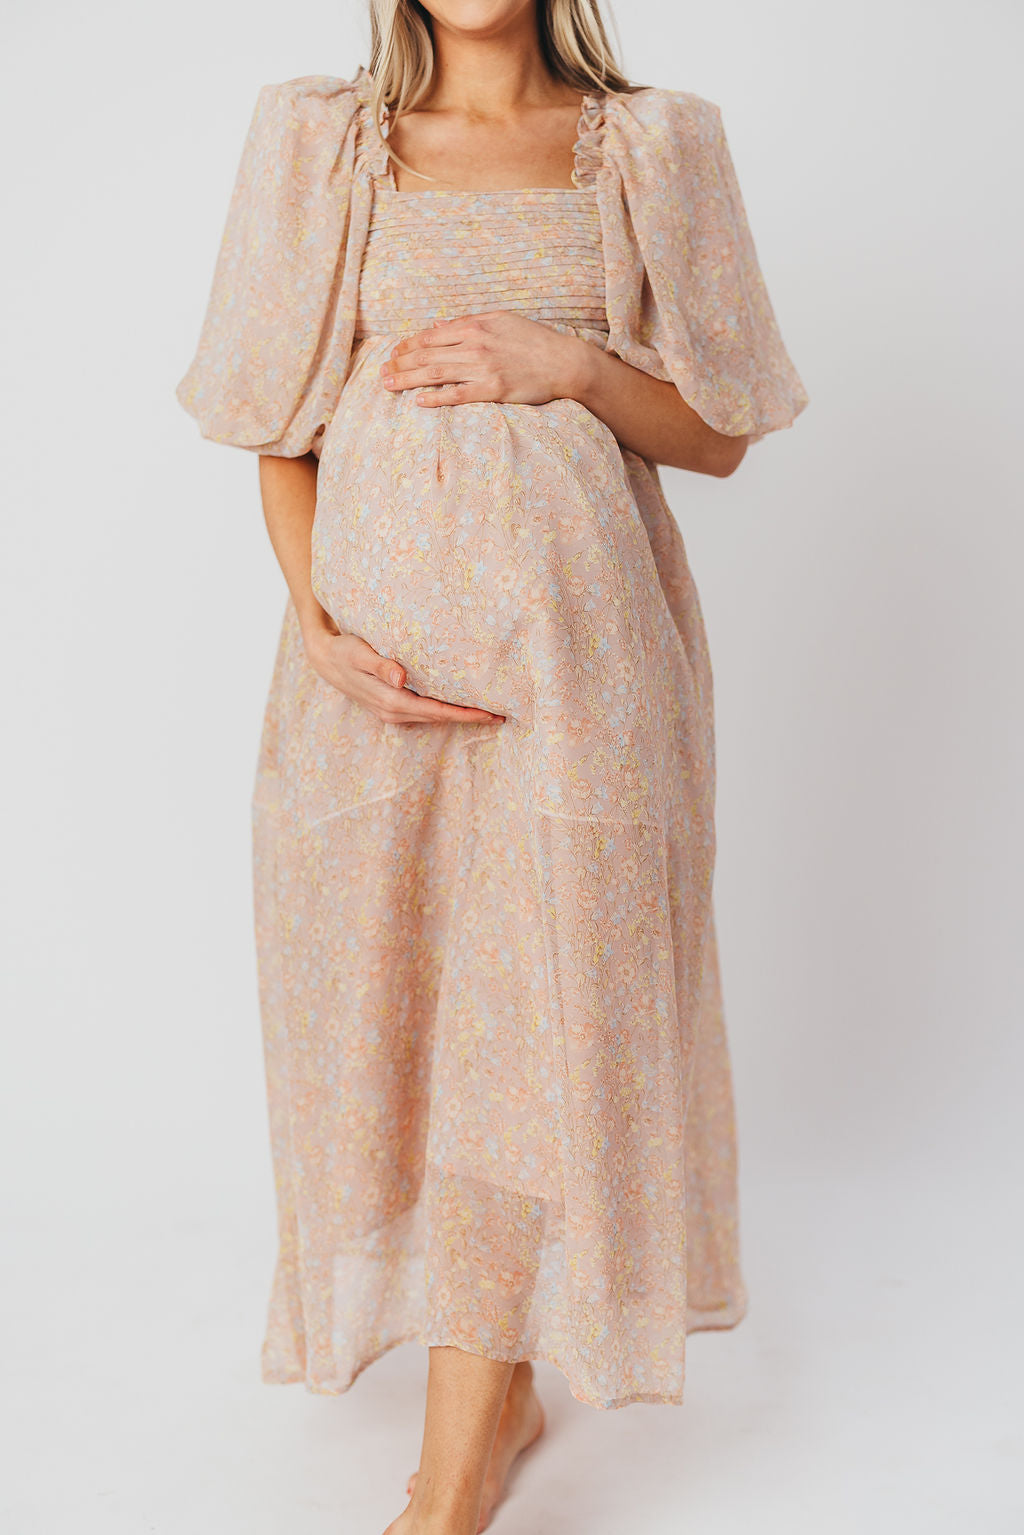 Melody Maxi Dress with Pleats and Bow Detail in Mauve Floral - Bump Friendly & Inclusive Sizing (S-3XL)